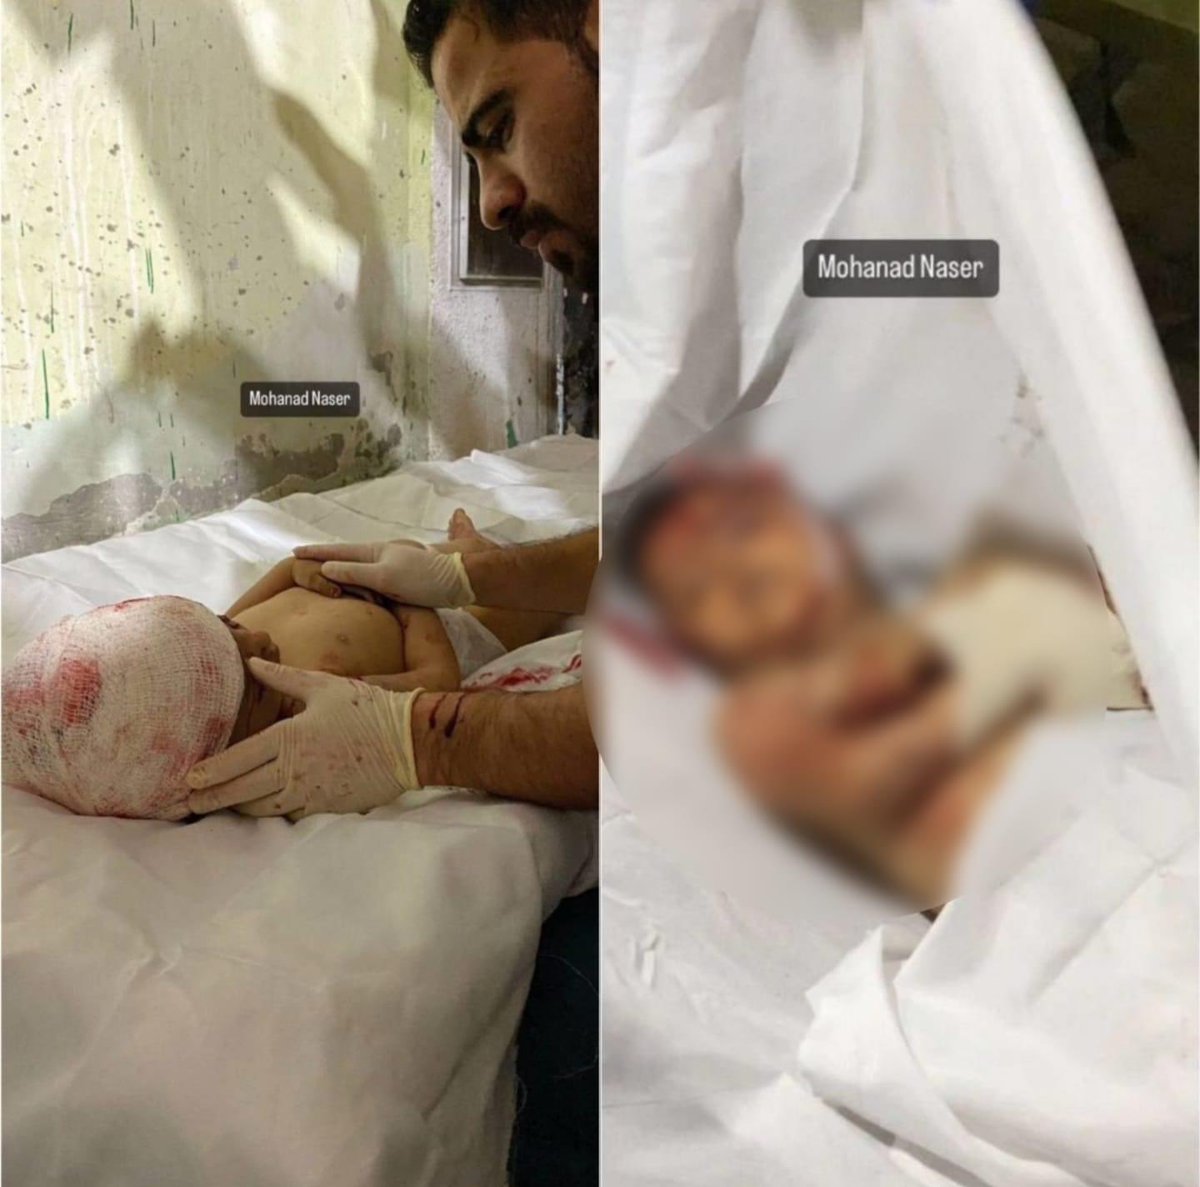 One child out of almost 15,000!!!! children who have been killed in the Israeli attacks in gaza. The child in the pictures was killed by Israeli attack on Al Shaboura refugee camp in Rafah last night. Source: Quds News Network